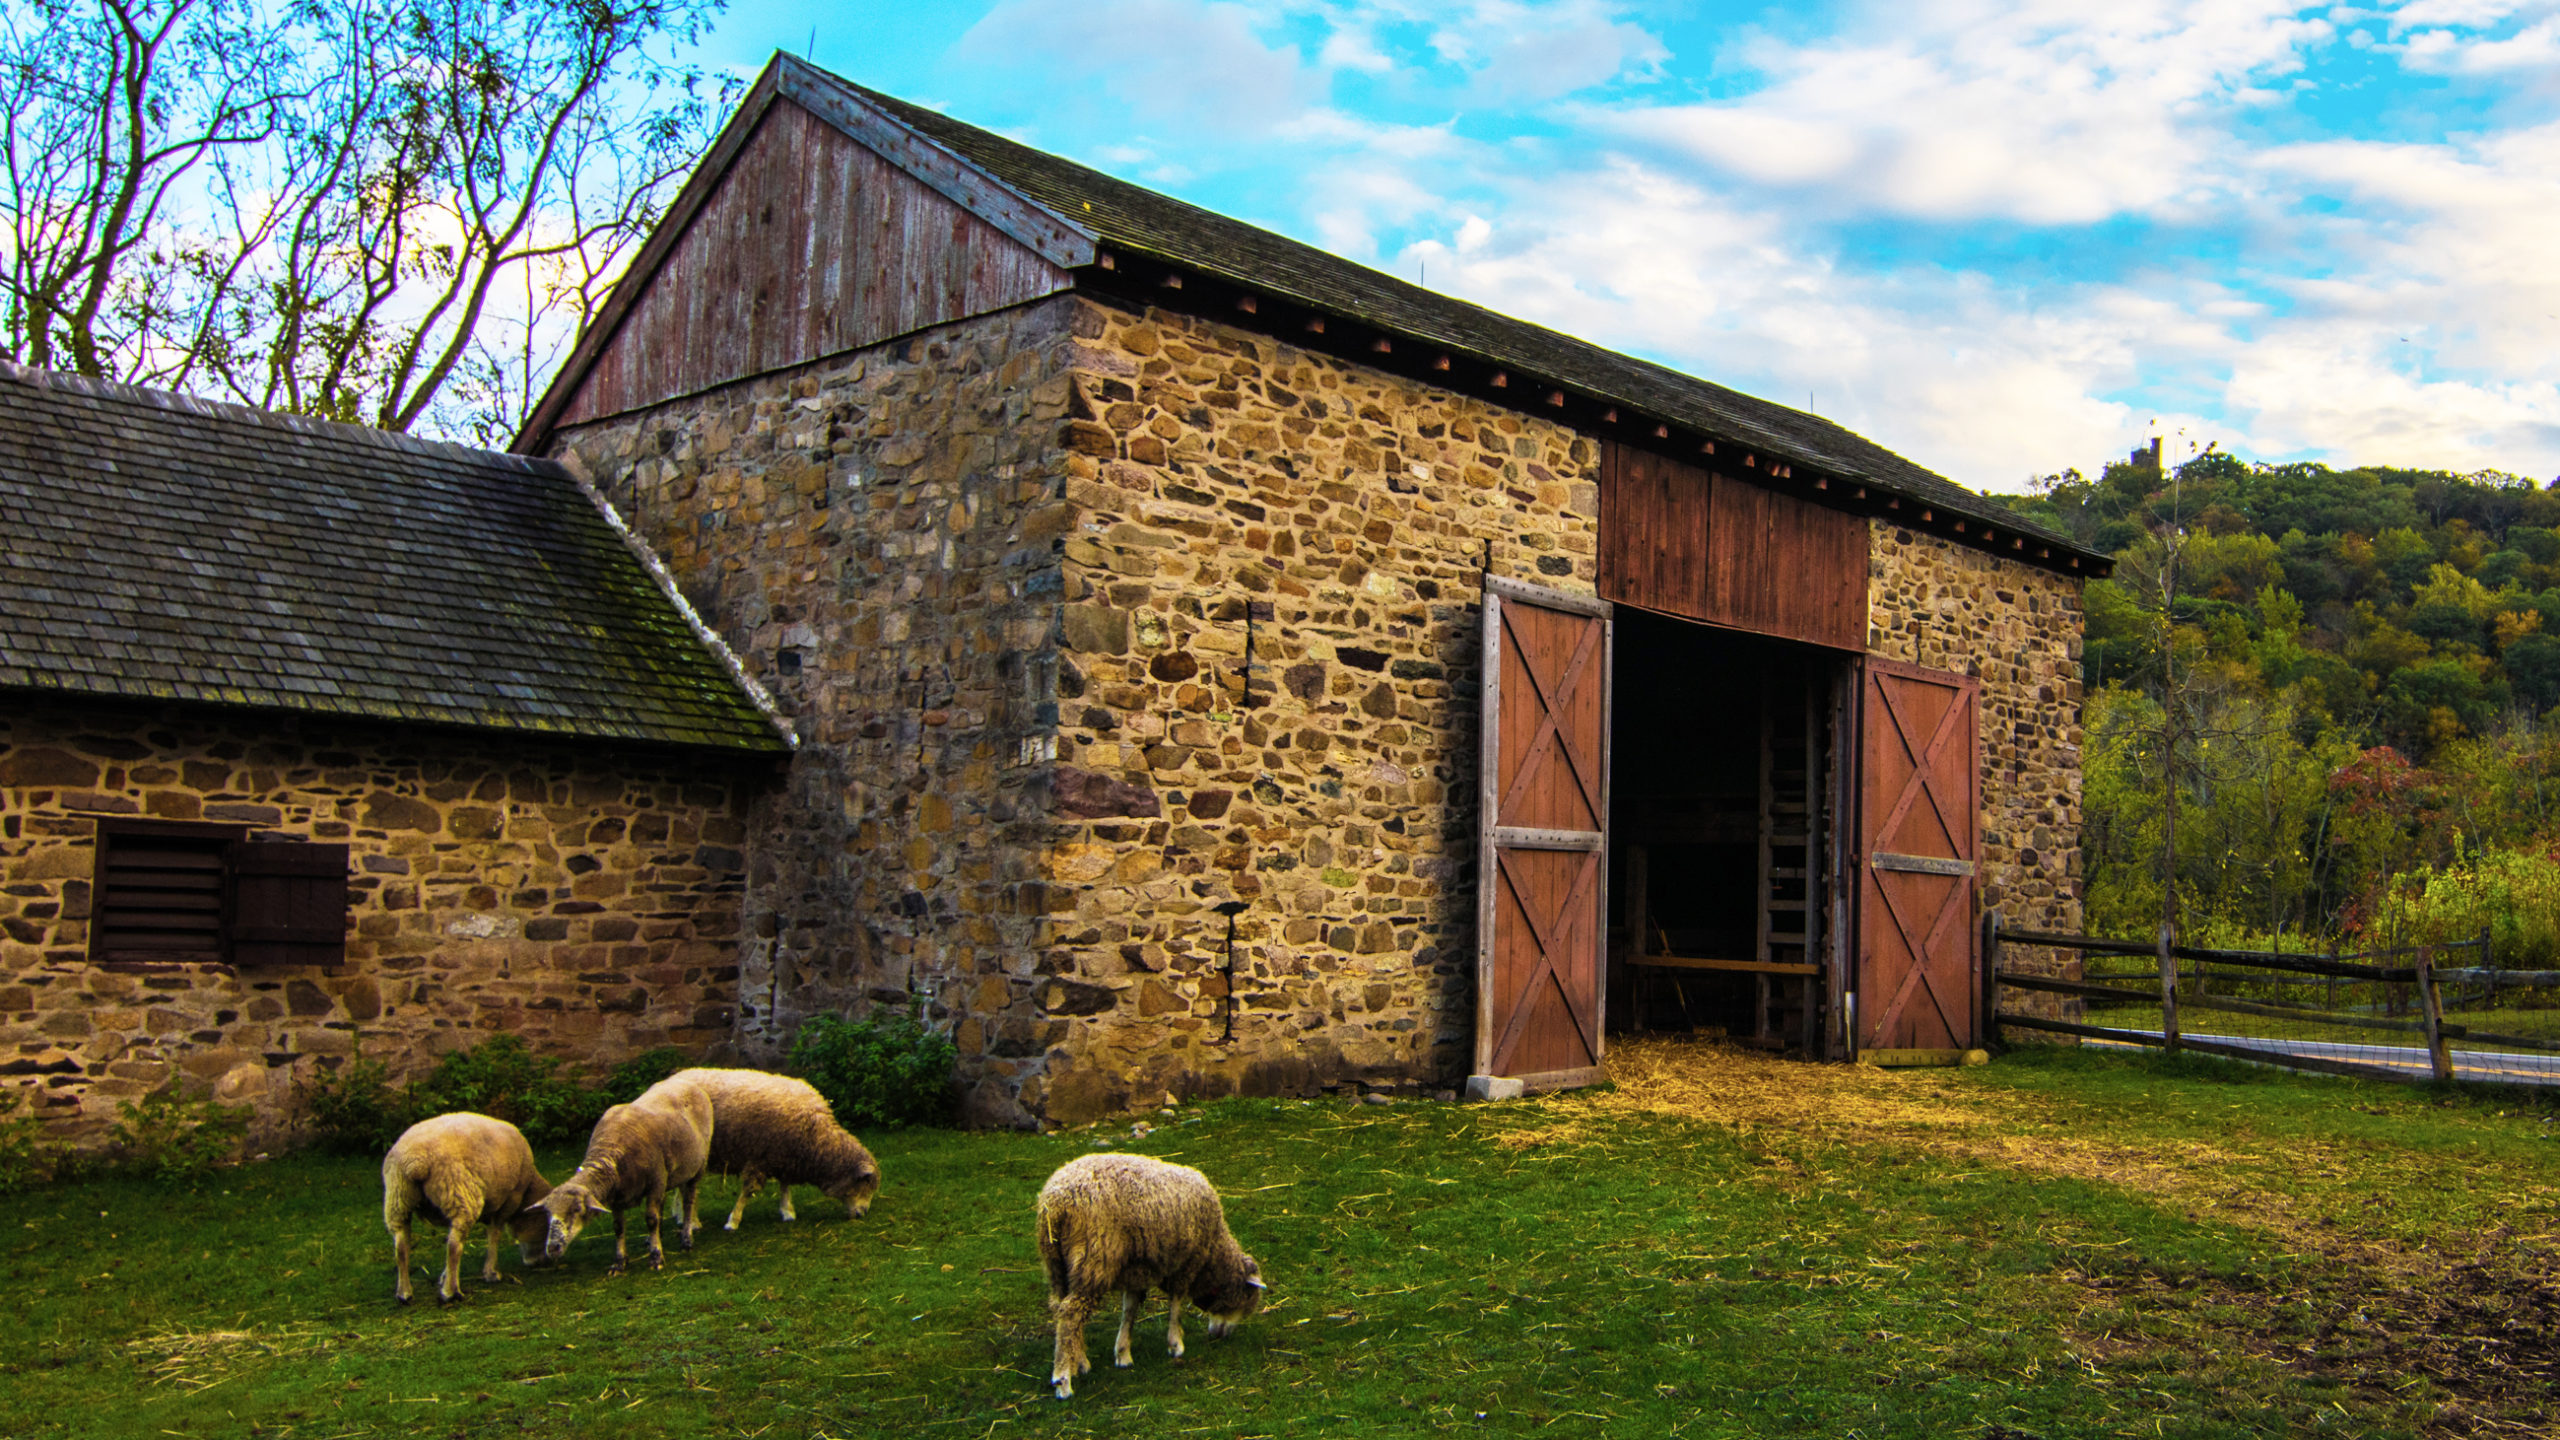 The Thompson-Neely Farmstead's barn with three sheep grazing outside.